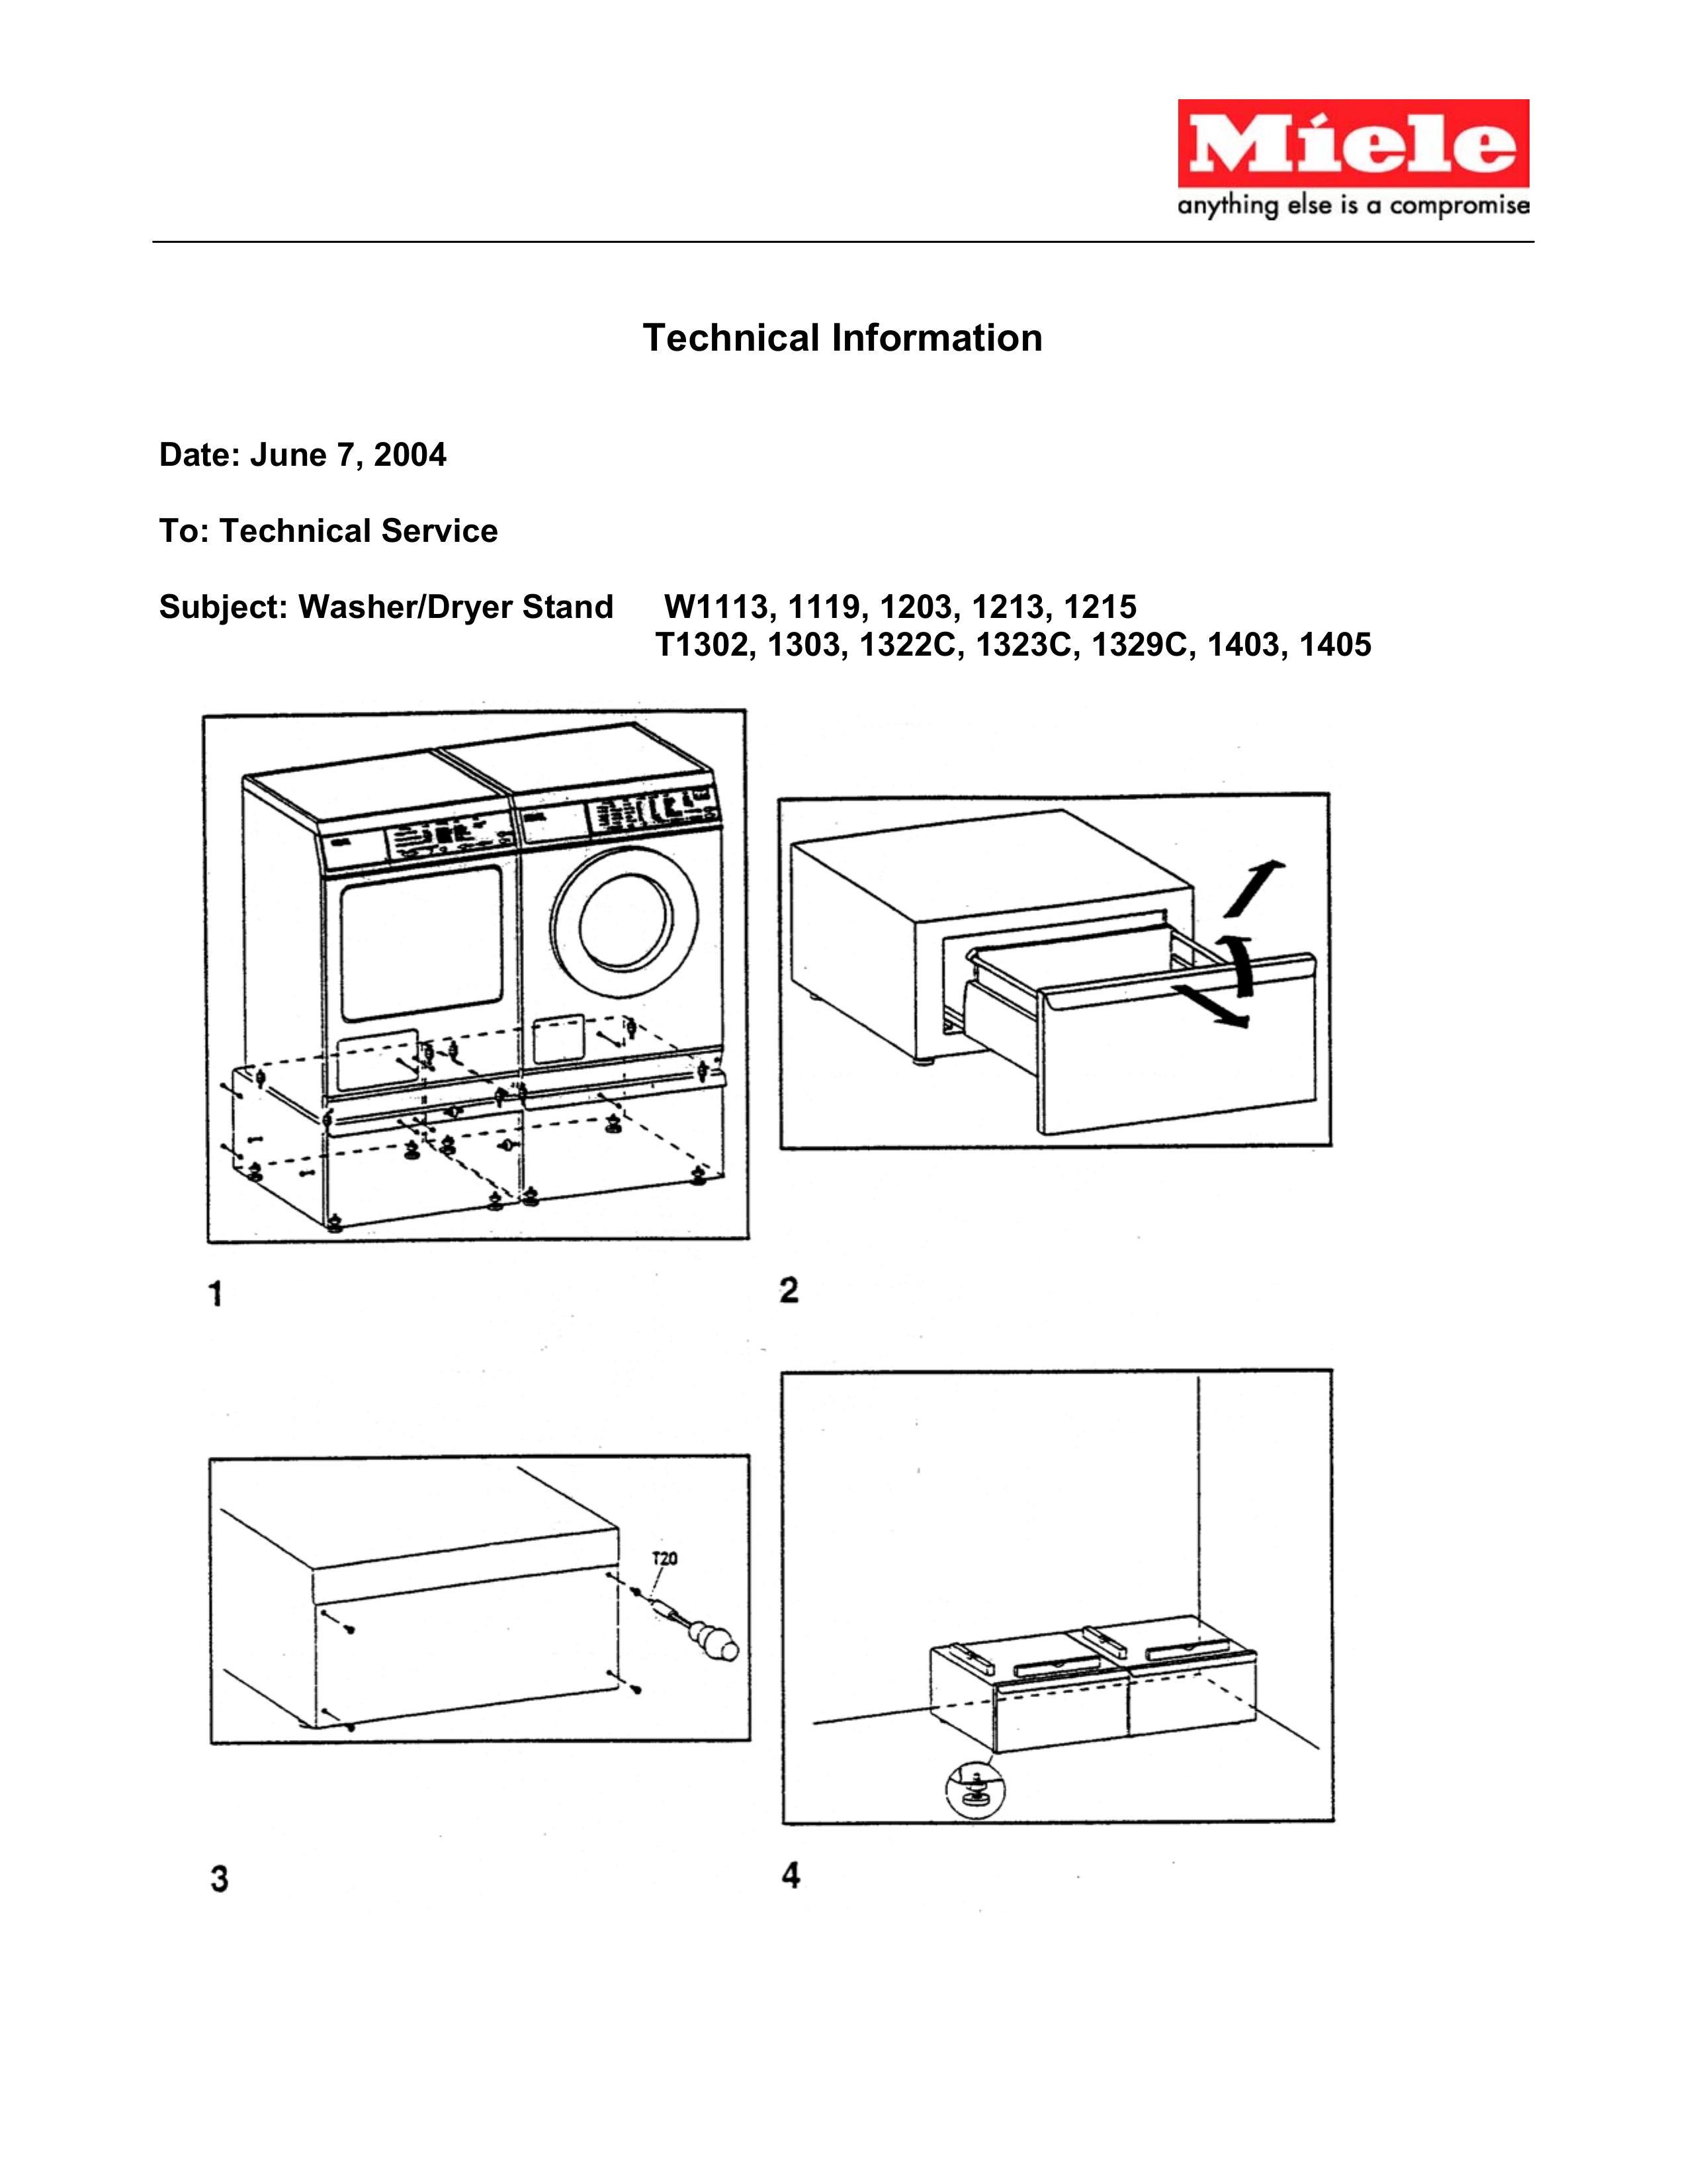 Miele T1323C Washer Accessories User Manual